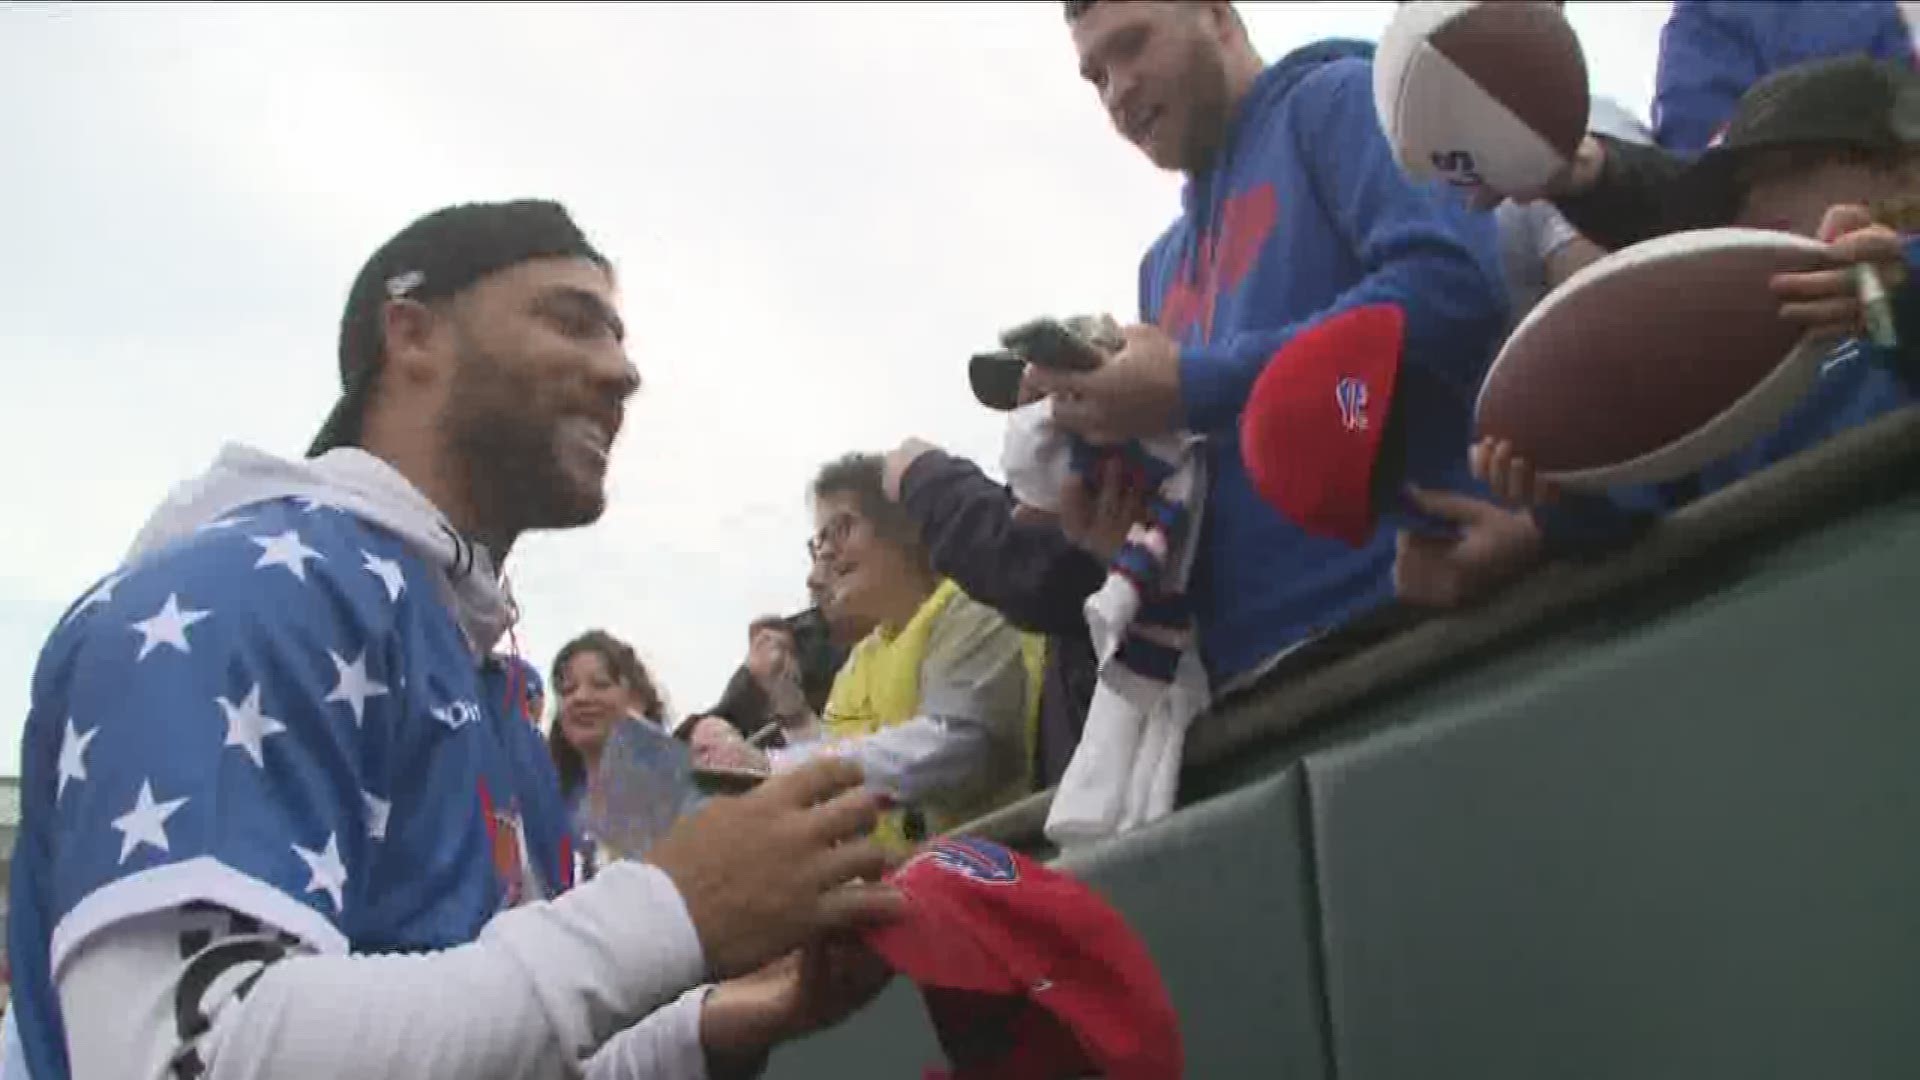 Hyde and his Buffalo Bills teammates battle it out on the diamond for charity.